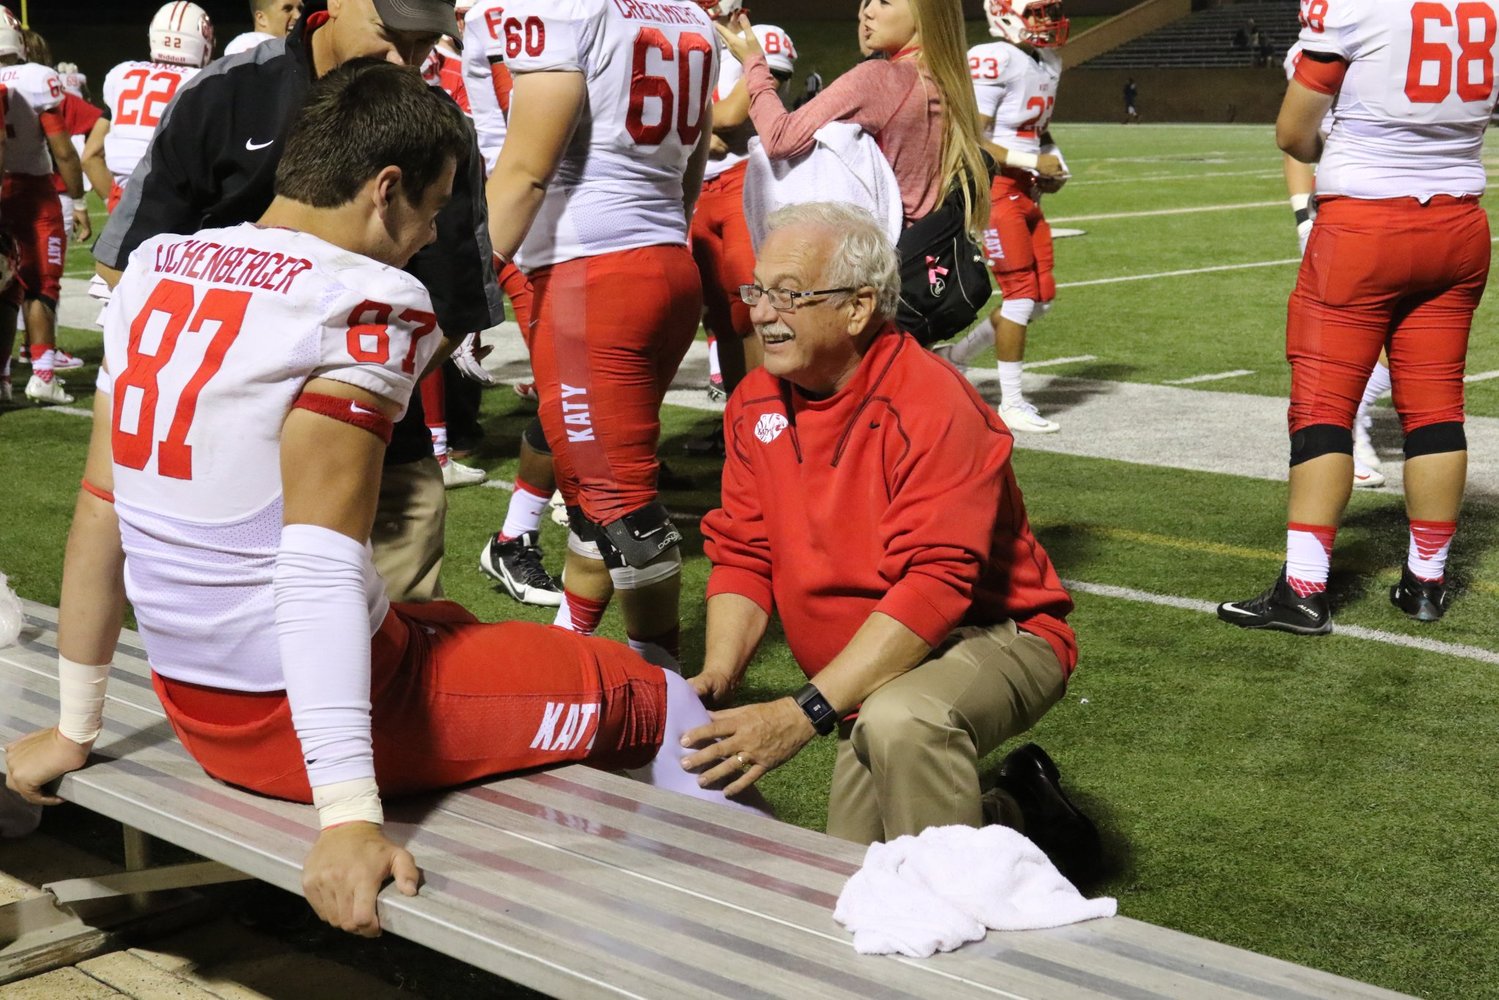 Dr. Mark Bing is pictured treating former Katy High tight end Parker Eichenberger during a high school football game. Dr. Bing served as the team doctor for Katy High for many decades. He died Jan. 9.